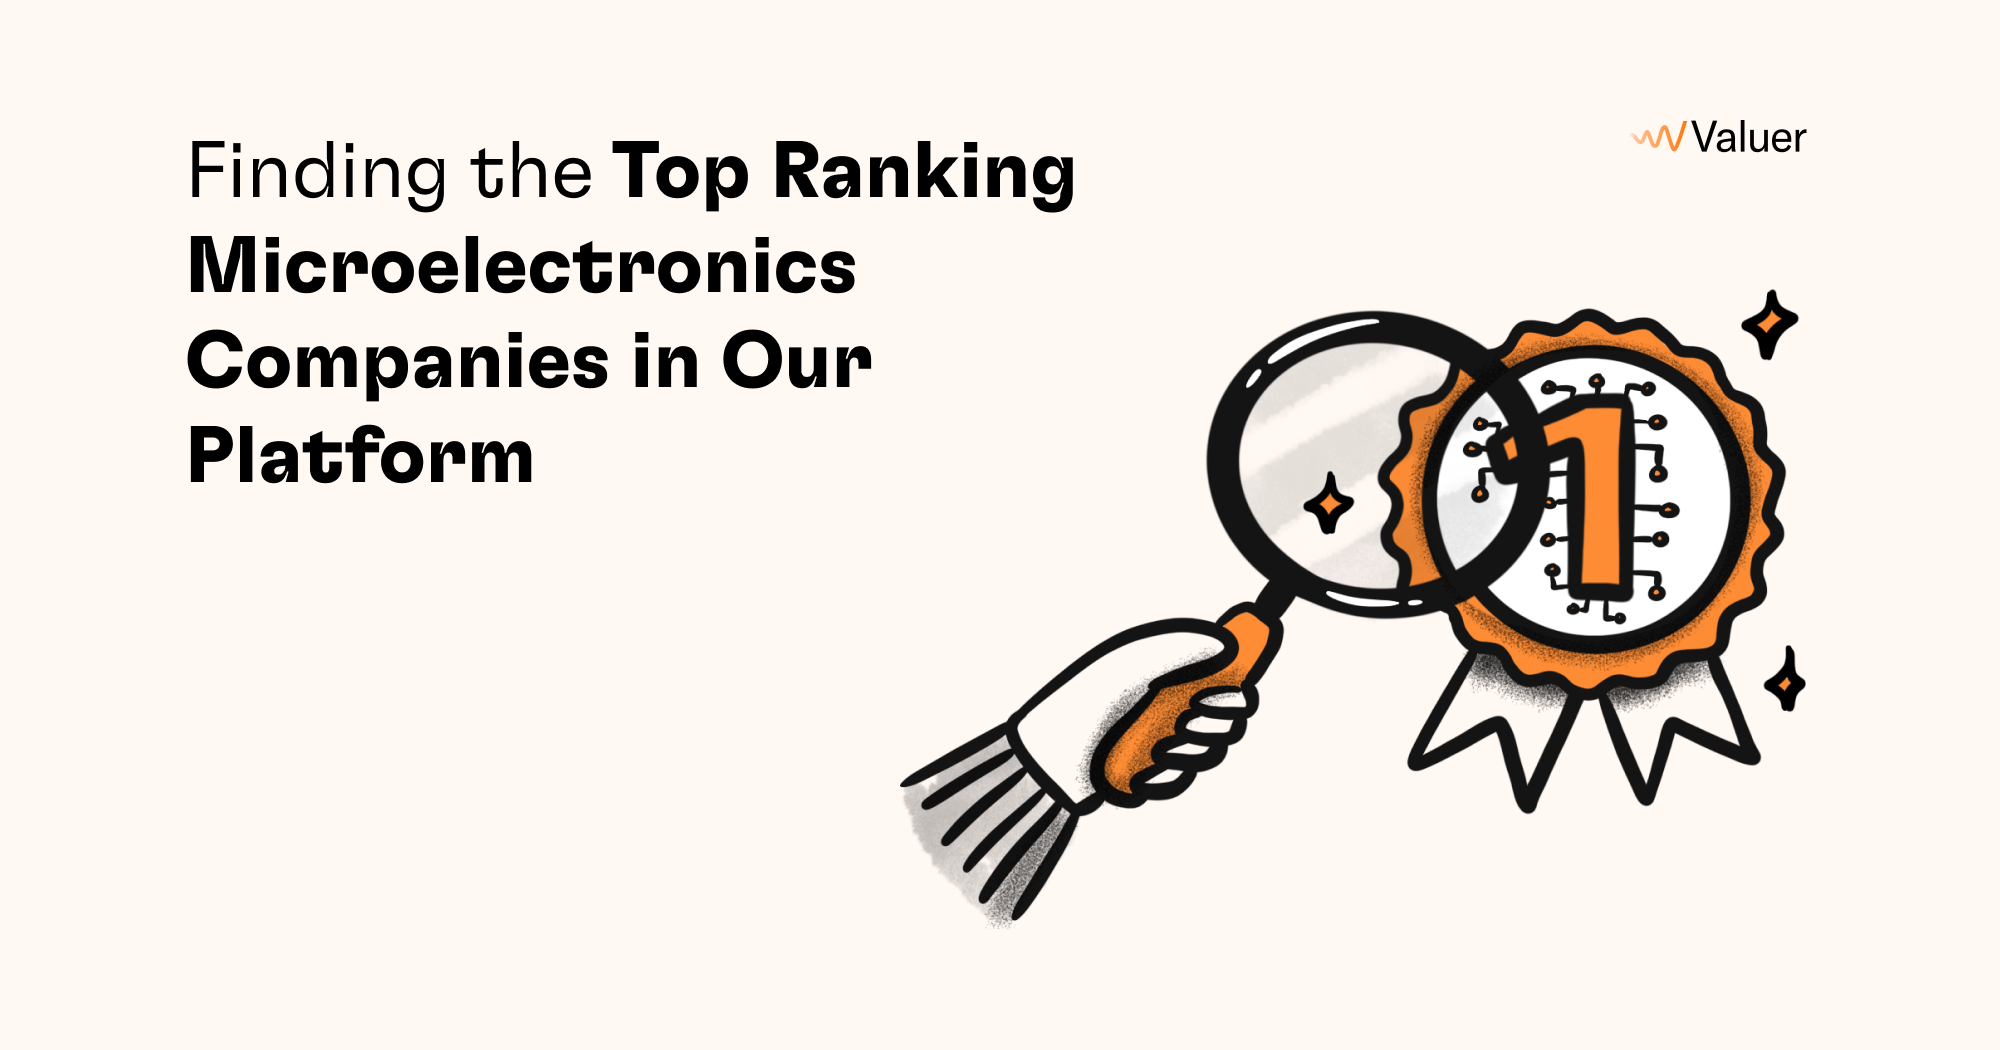 Finding the Top Ranking Microelectronics Companies in Our Platform